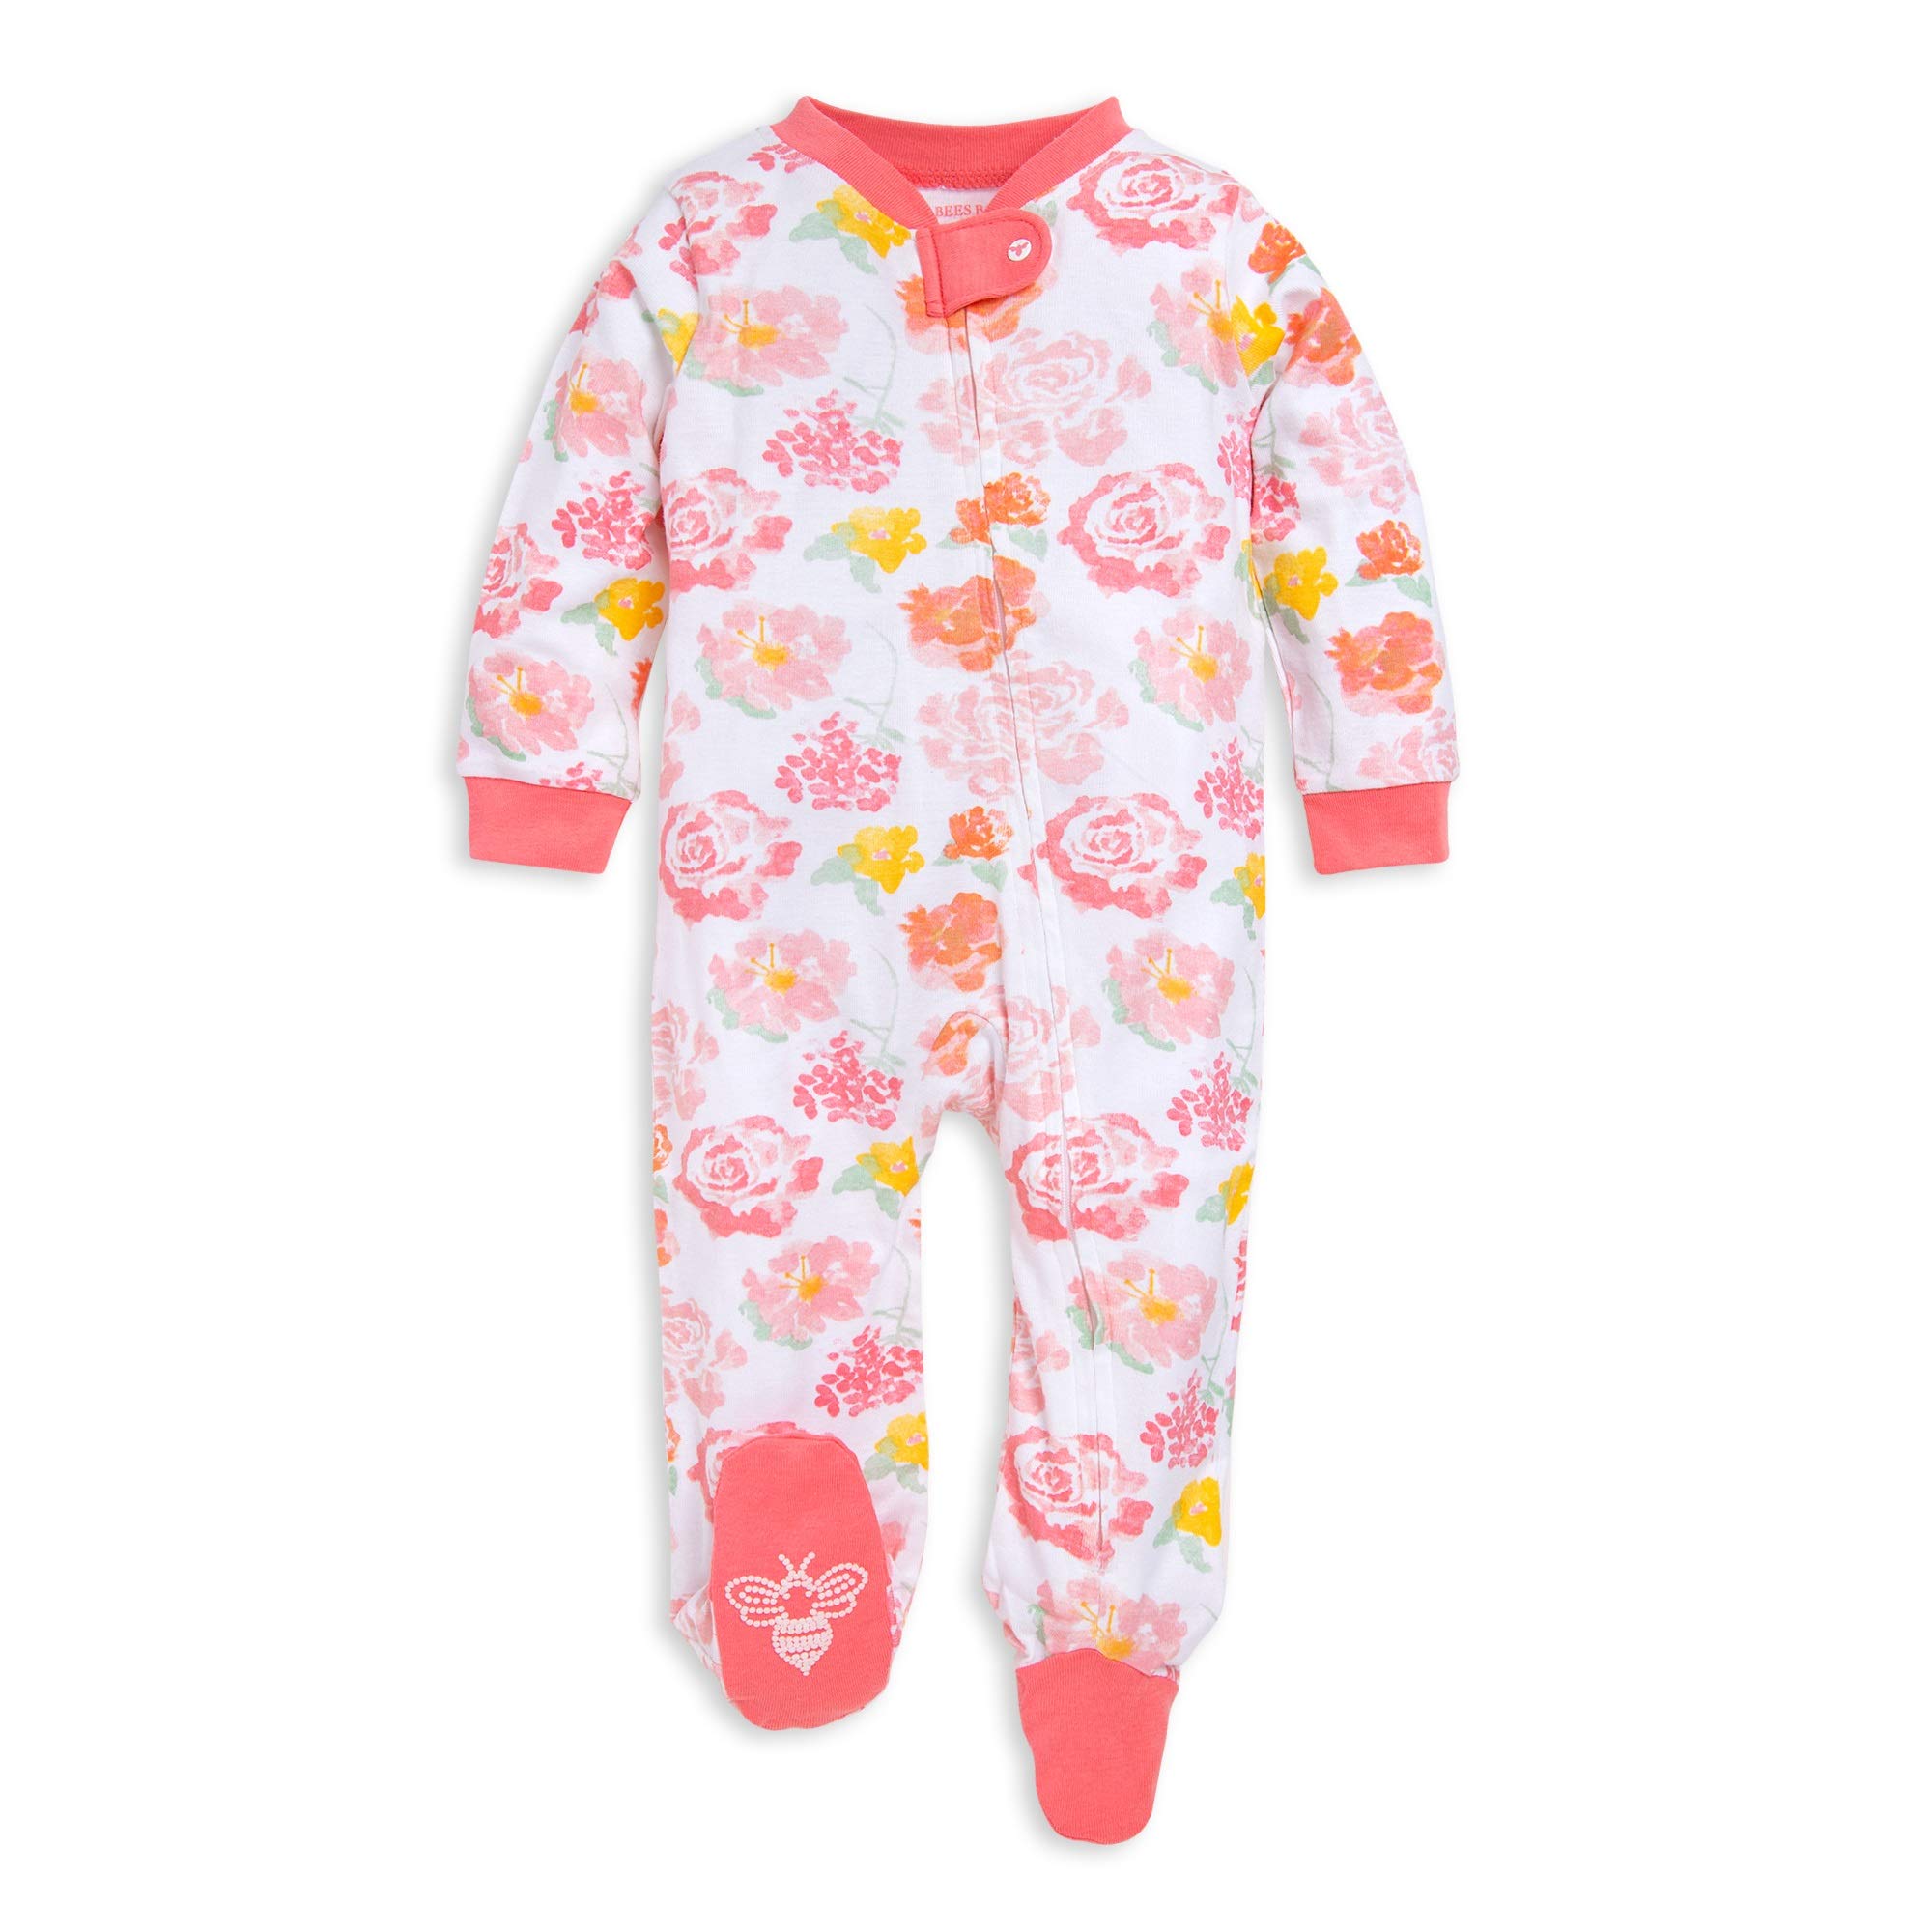 Burt's Bees Baby Baby Girl's Sleep and Play Pajamas, 100% Organic Cotton One-Piece Romper Jumpsuit Zip Front Pjs, Rosy Spring, 6 Months